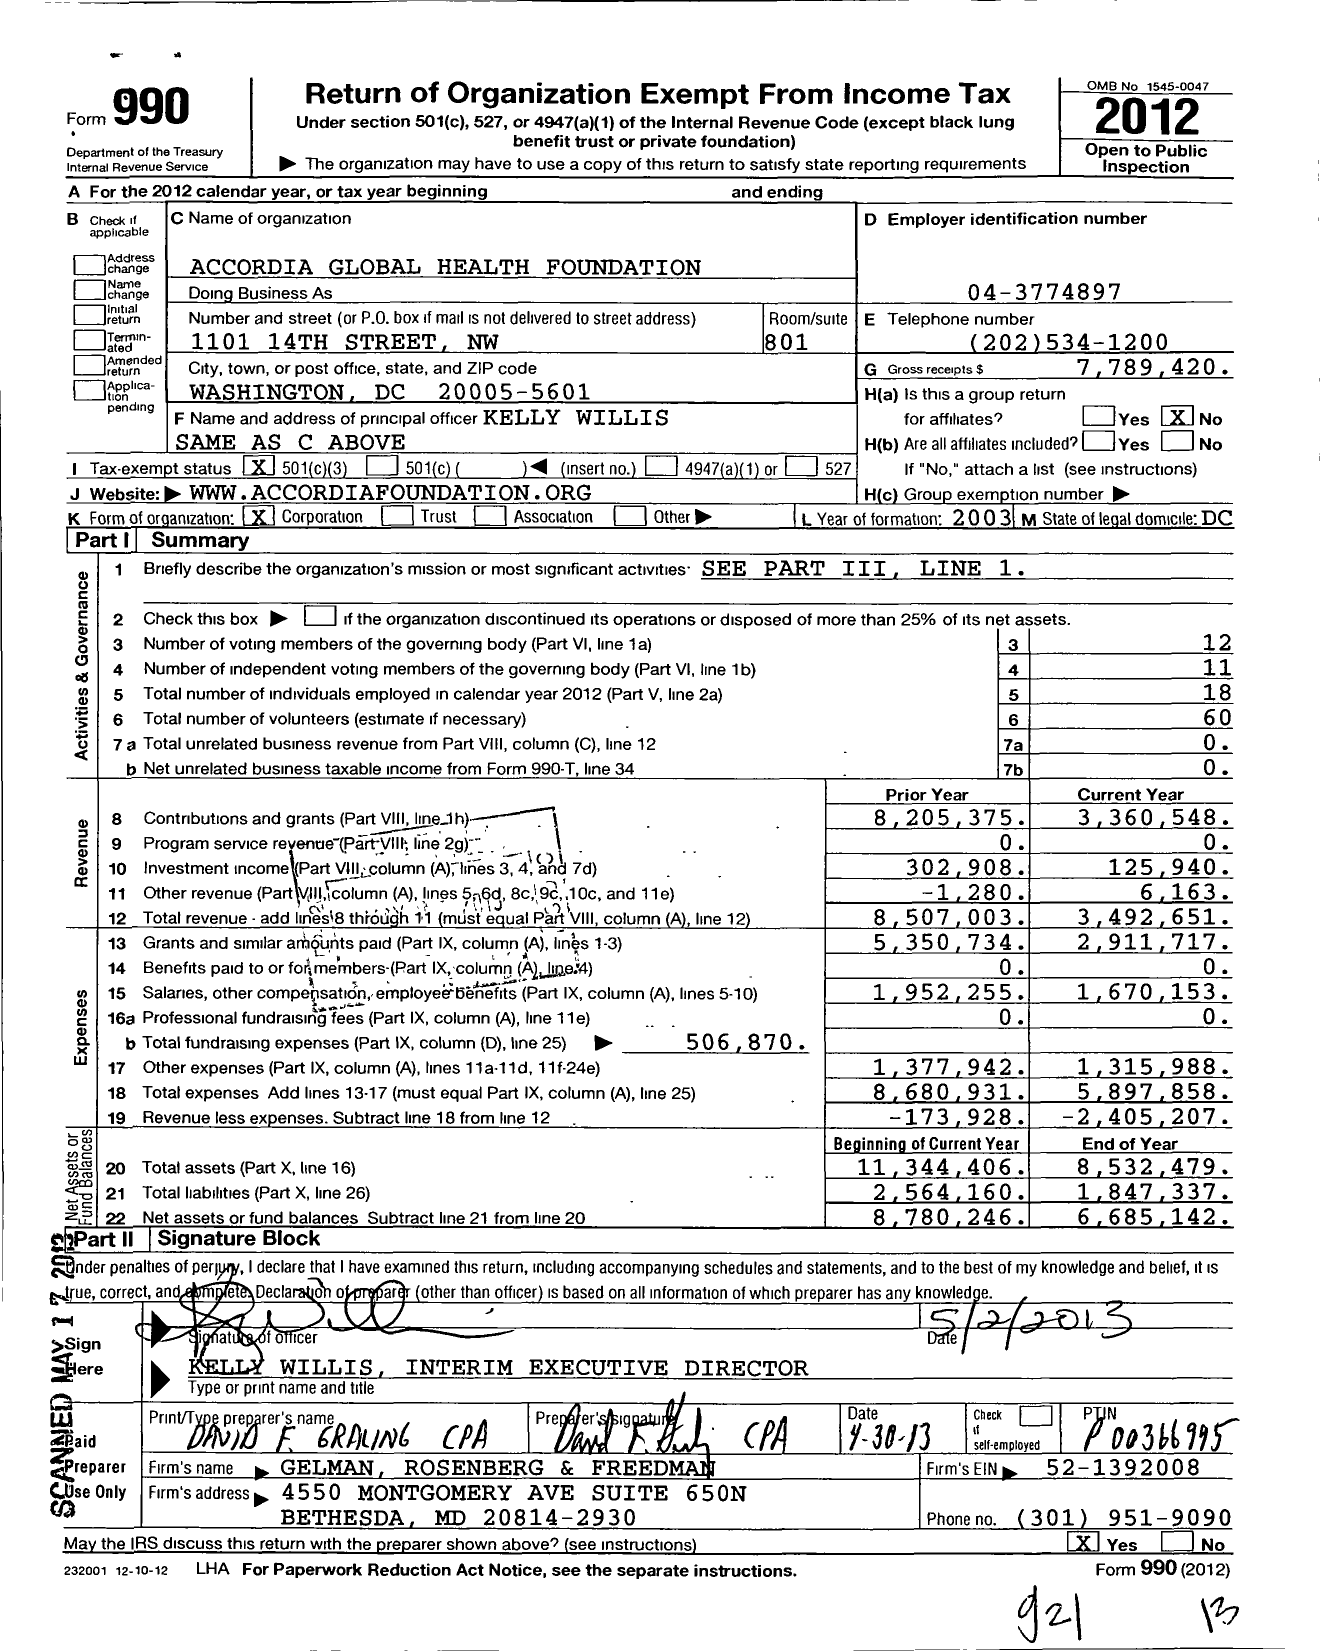 Image of first page of 2012 Form 990 for Accordia Global Health Foundation